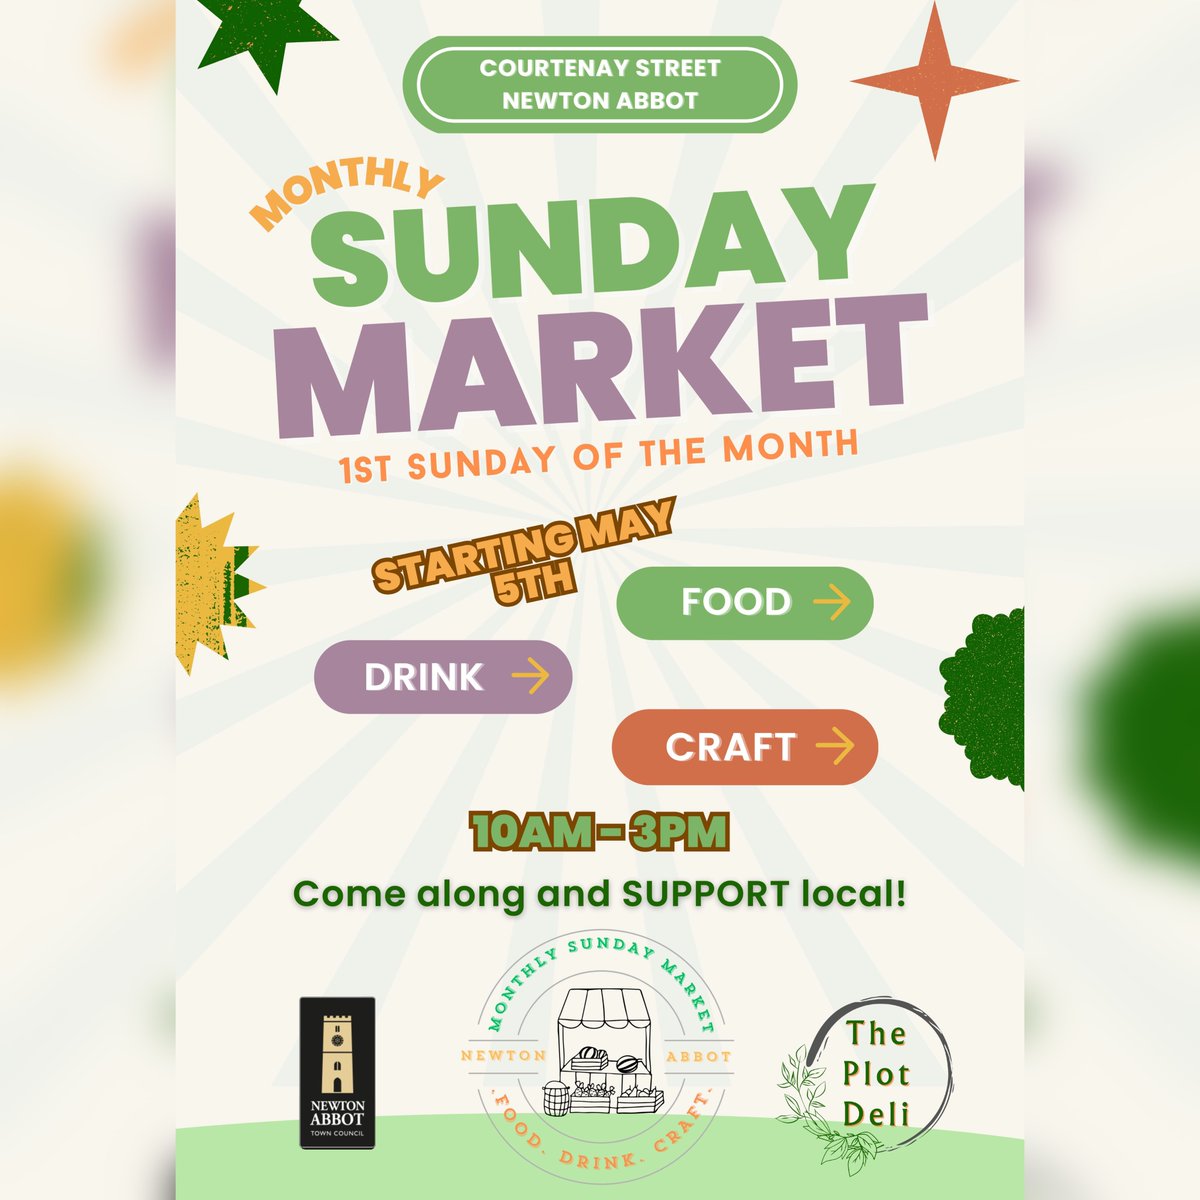 Sunday Market in Newton Abbot starting next month!! We are excited for this new monthly market 😊 #sundaymarket #monthlymarket #drink #food #craft #newtonabbot